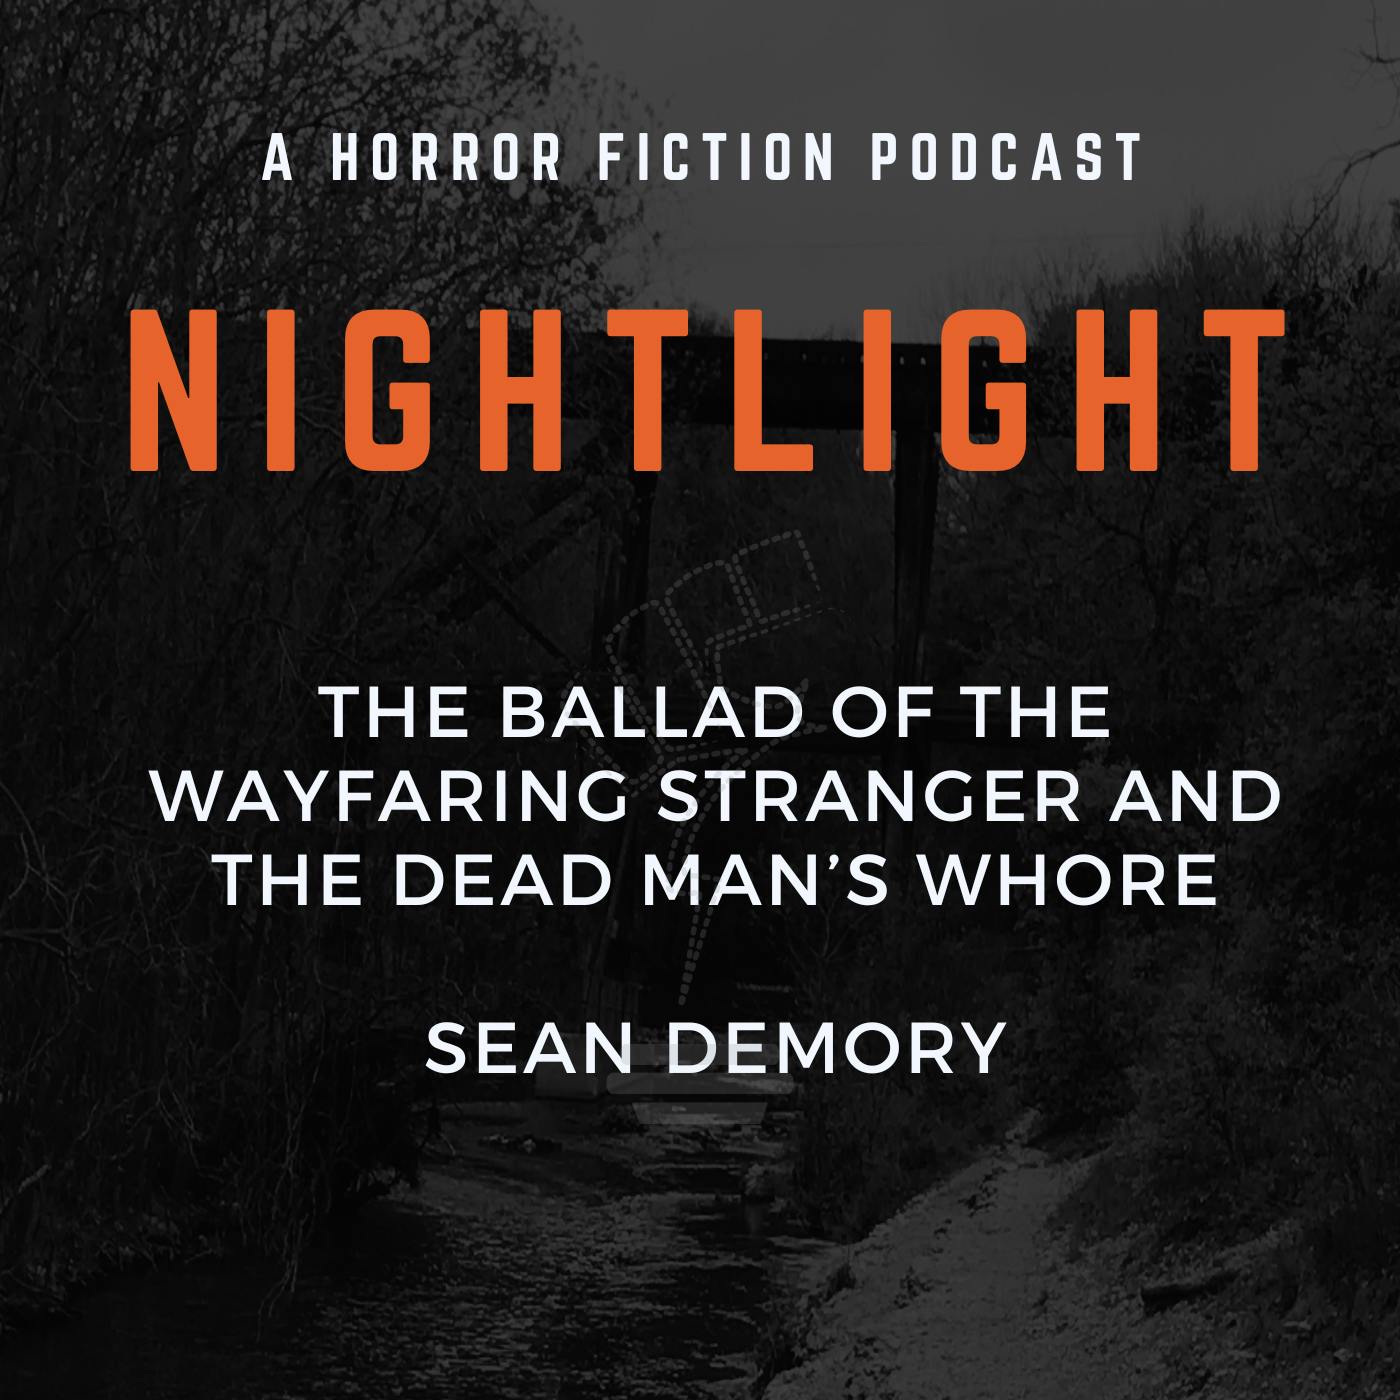 627: The Ballad of the Wayfaring Stranger and the Dead Man's Whore by Sean Demory